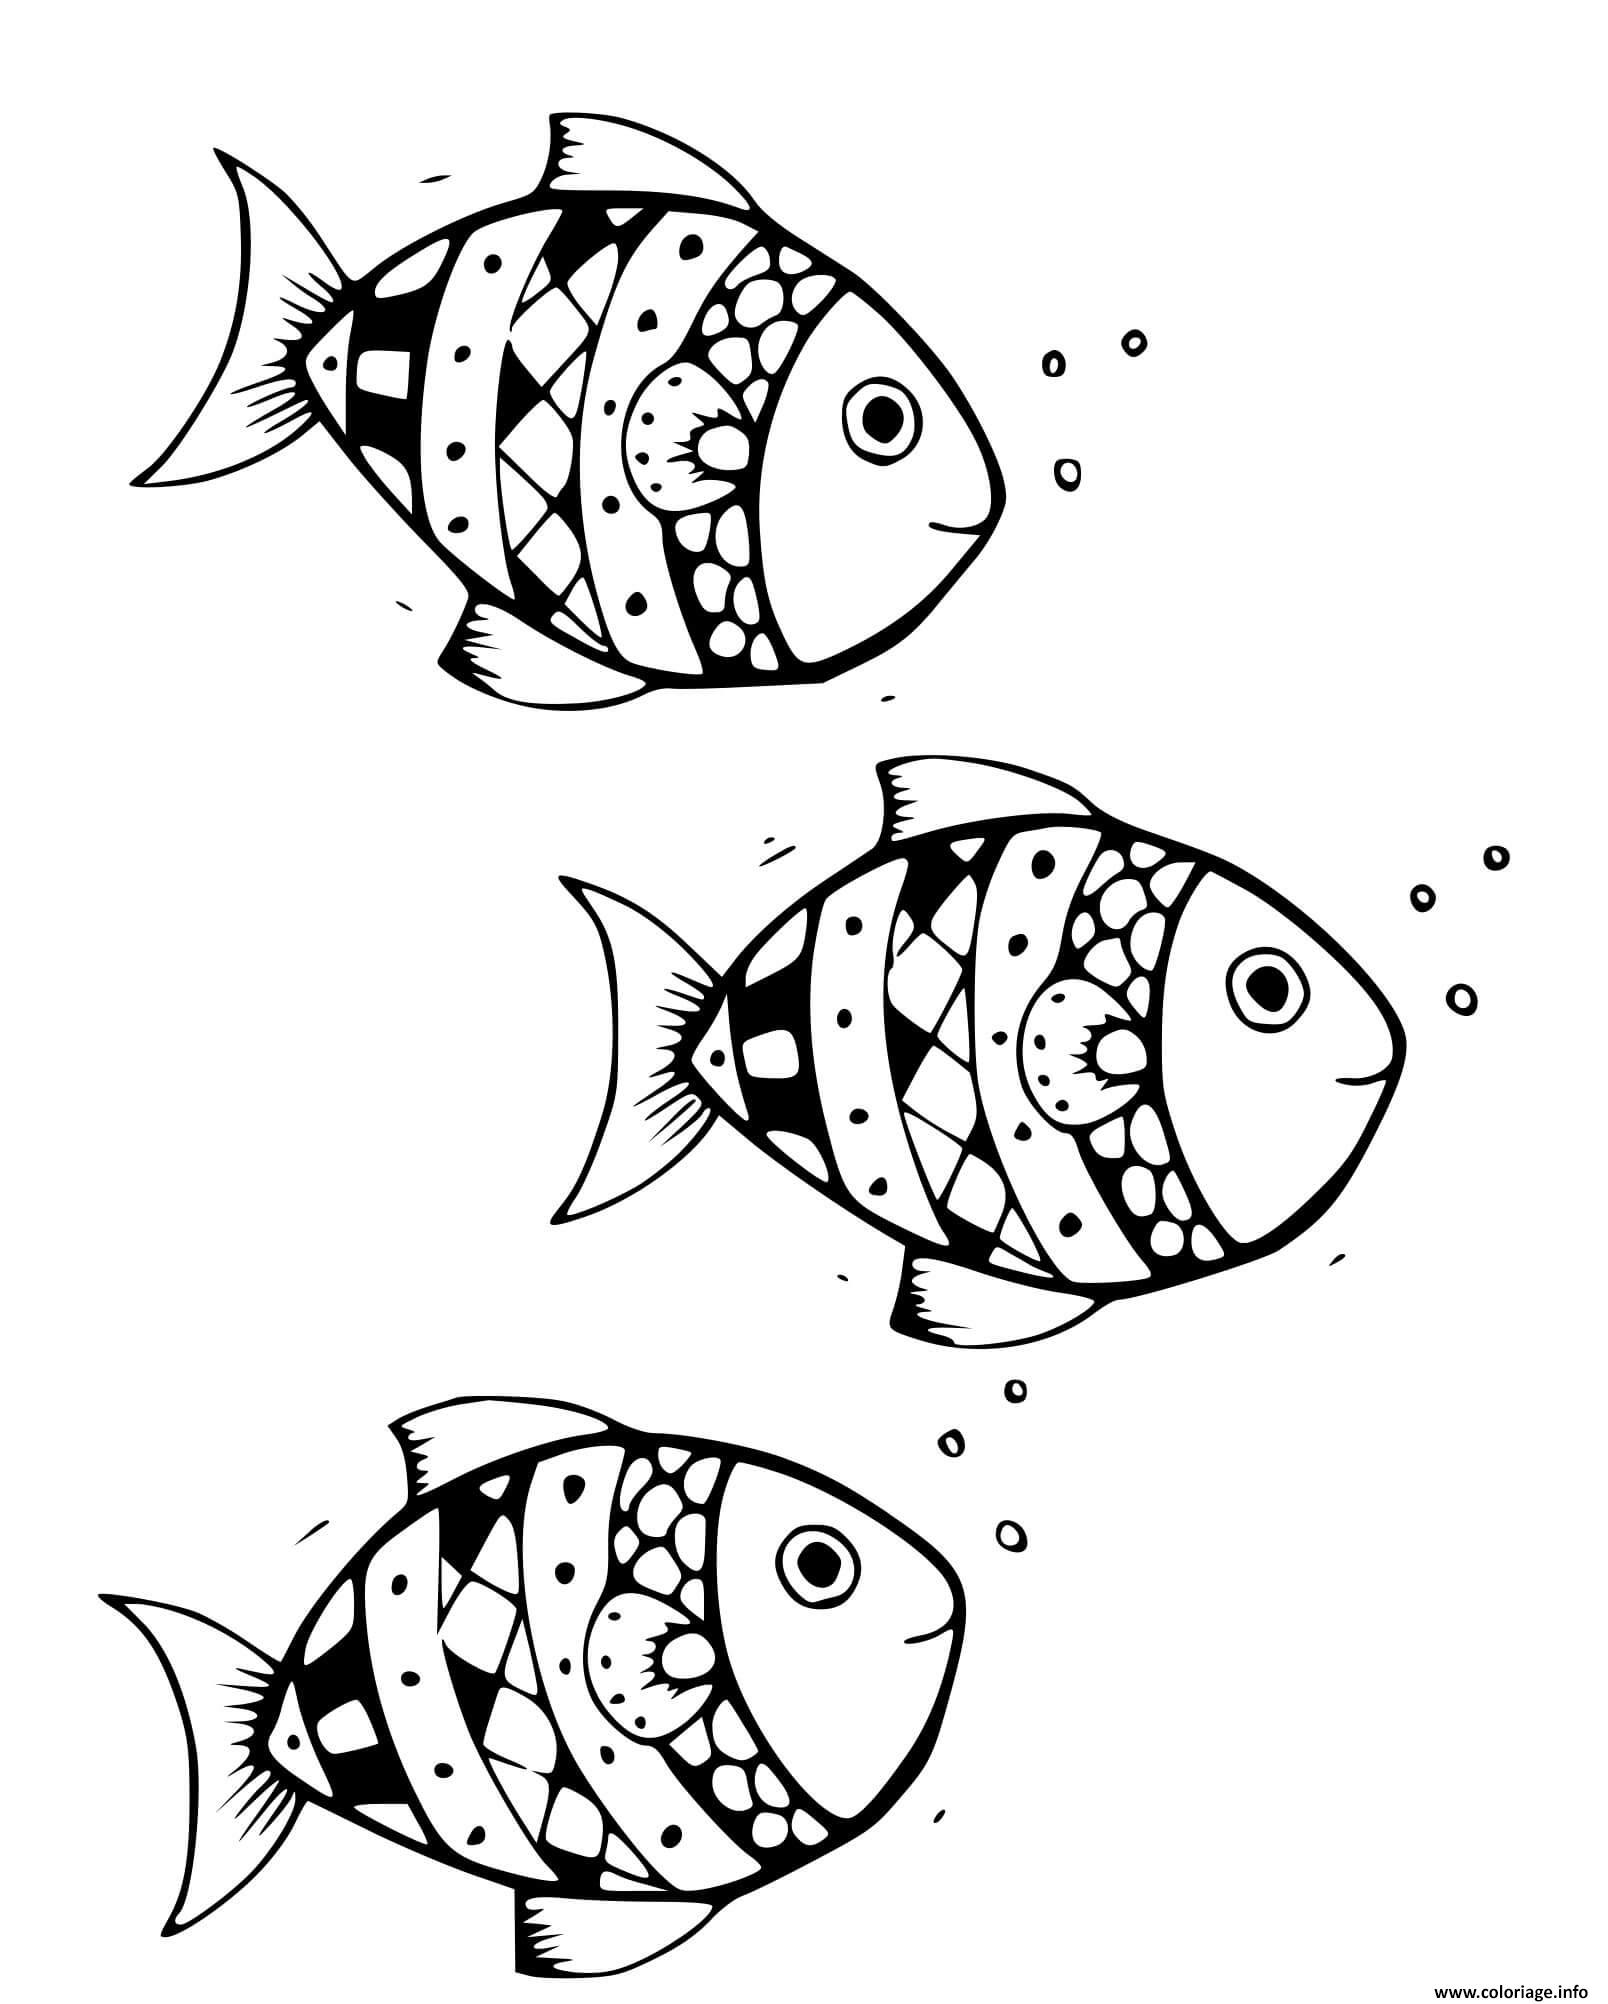 Dessin poissons a nageoires rayonnees Actinopterygiens Coloriage Gratuit à Imprimer